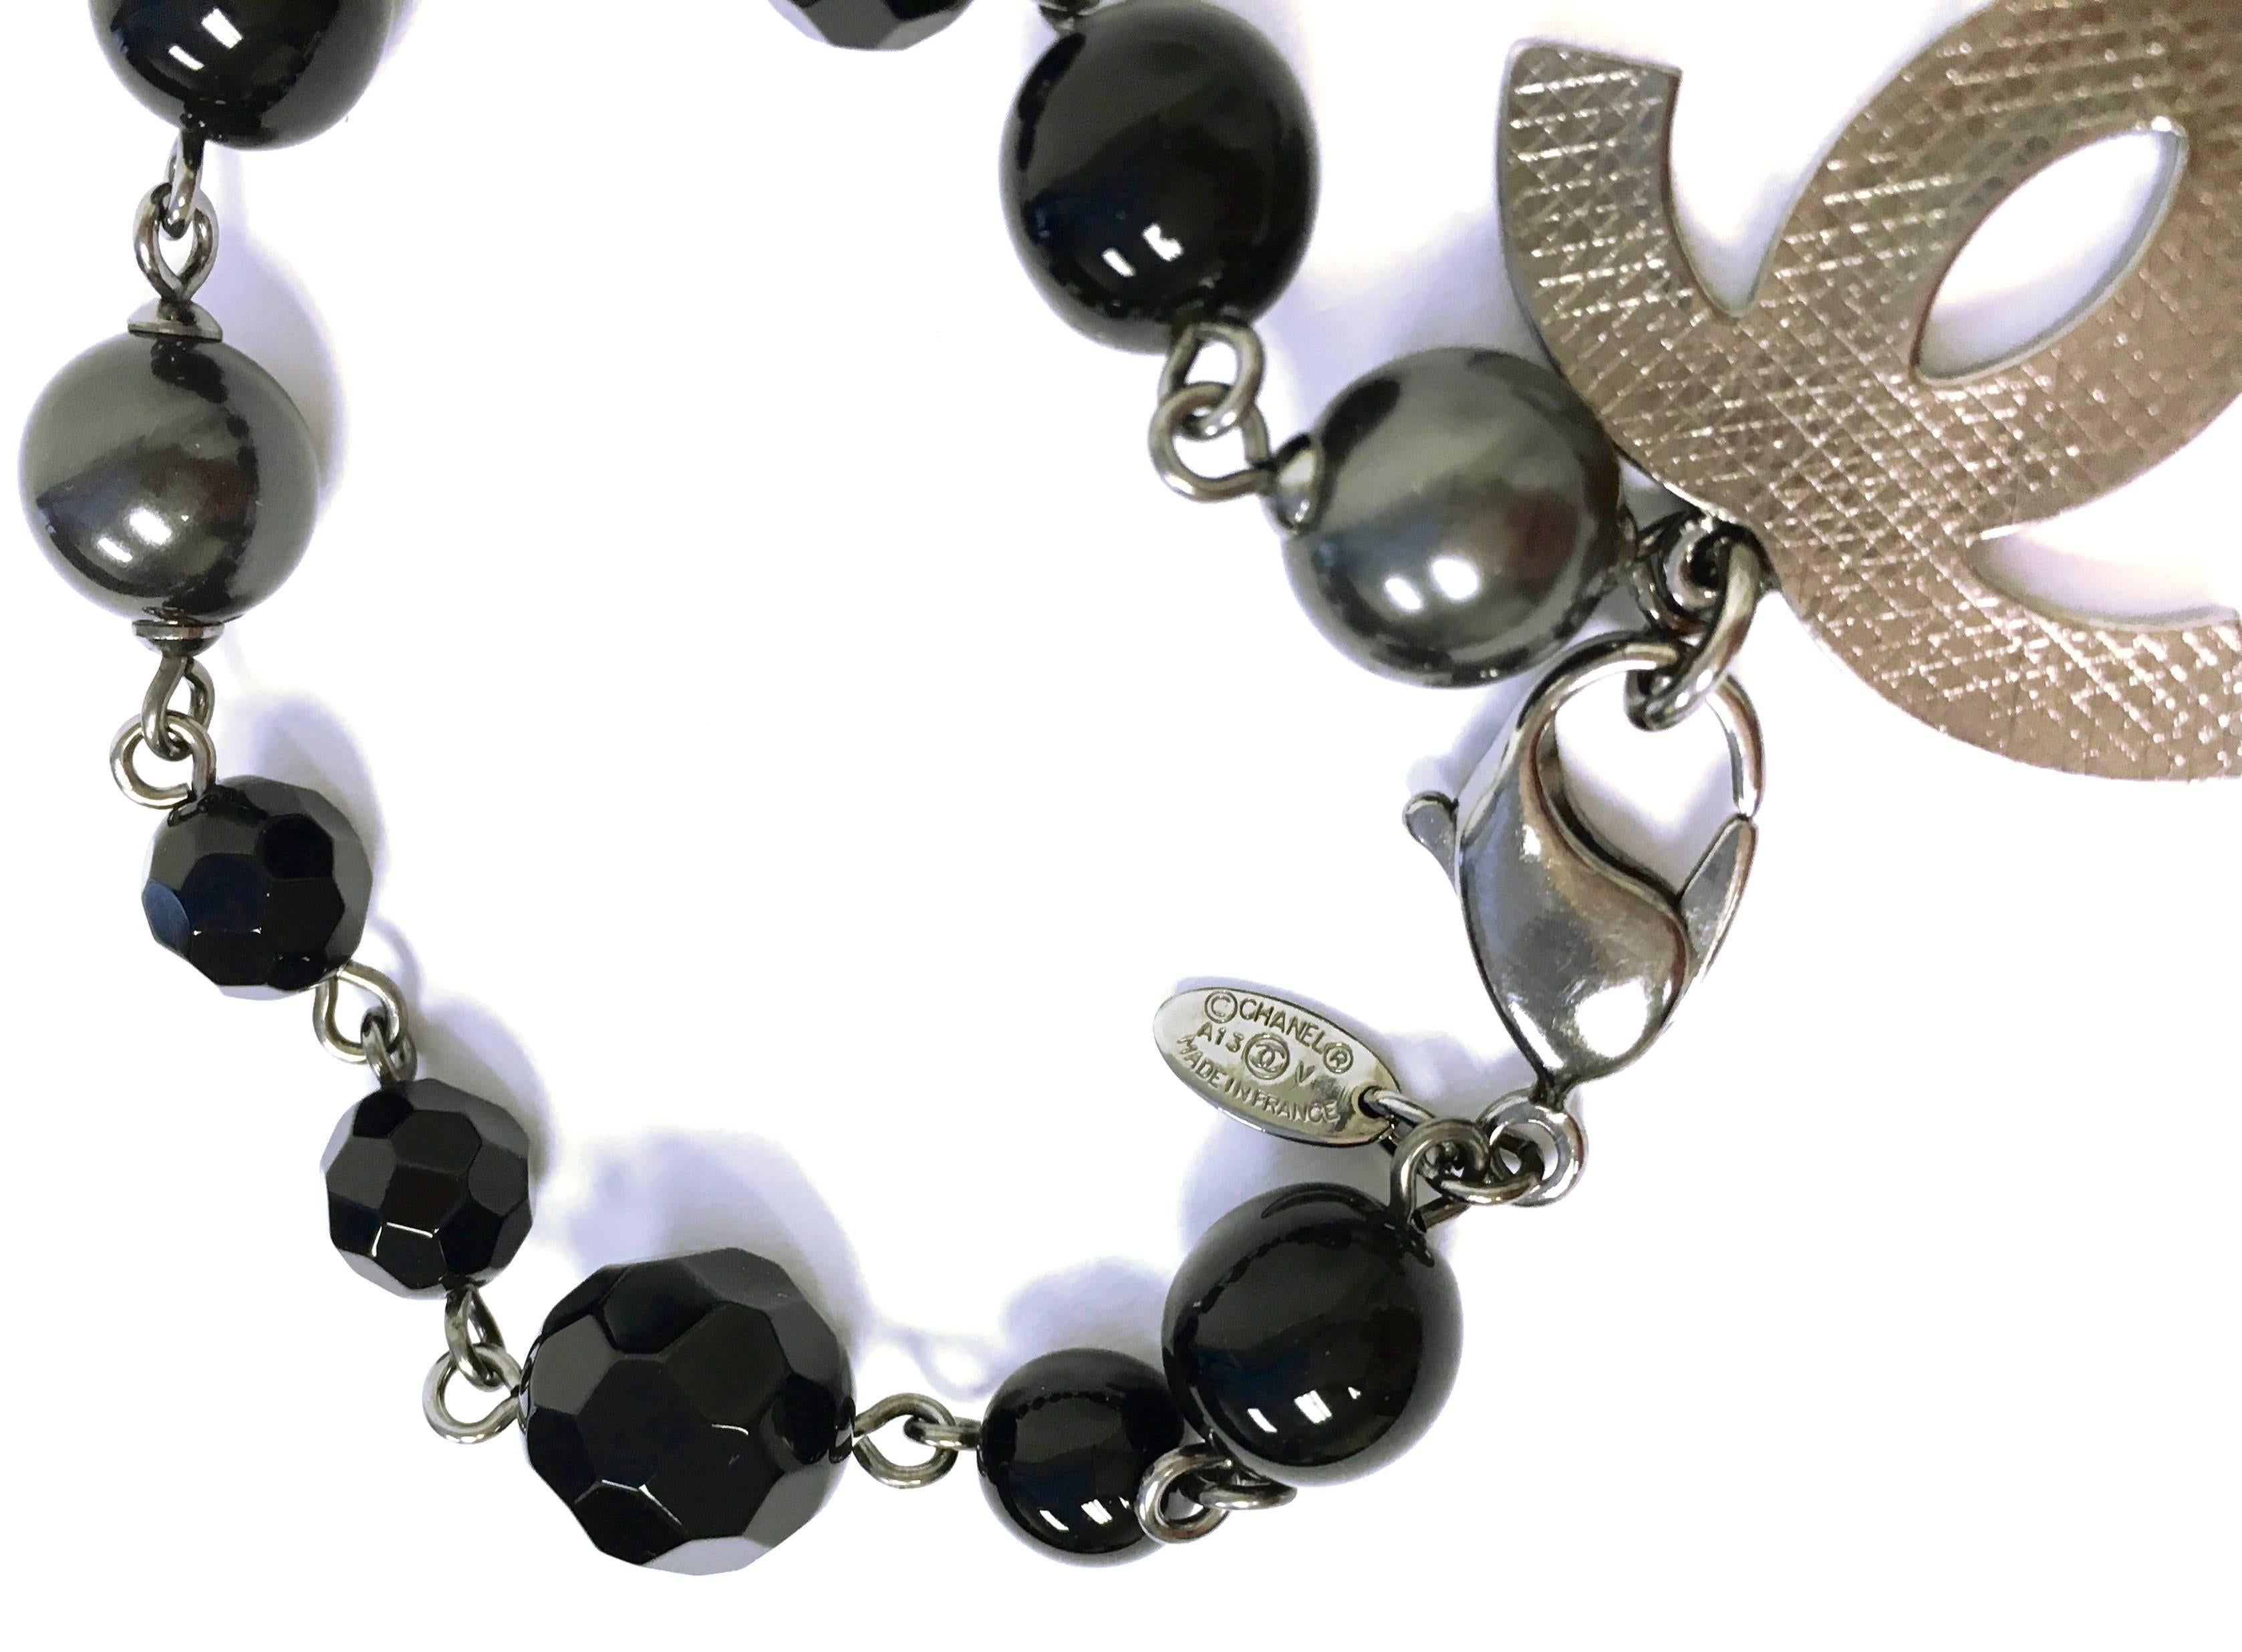 Chanel CC Logo Charm Black and Grey Pearl and bead bracelet.
Length: 7